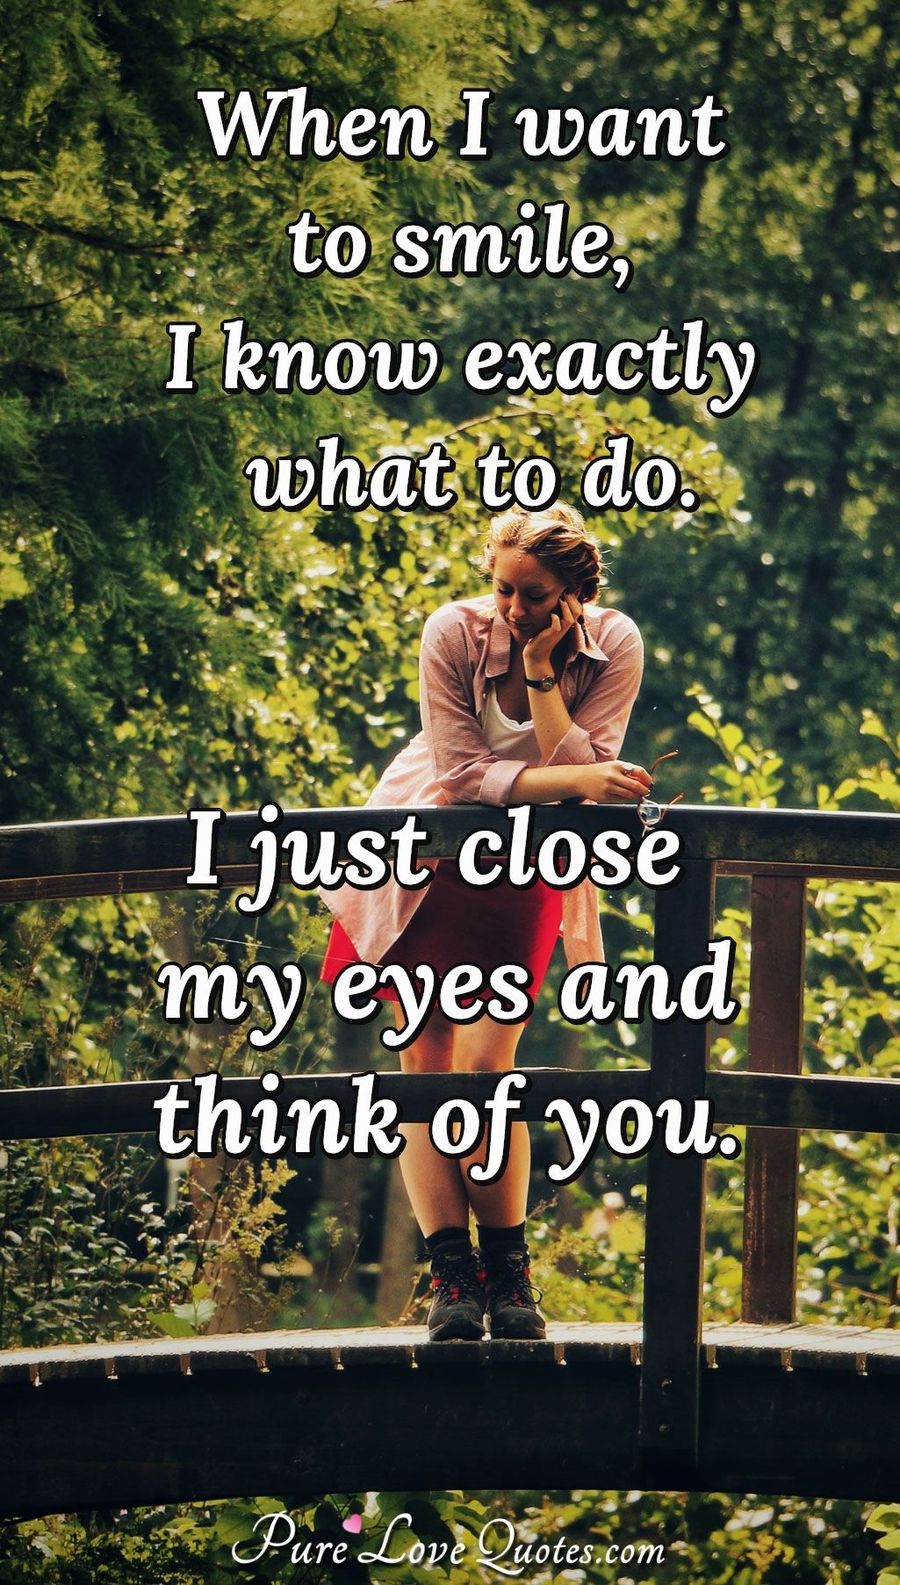 When I want to smile, I know exactly what to do. I just close my eyes and think of you. - Anonymous